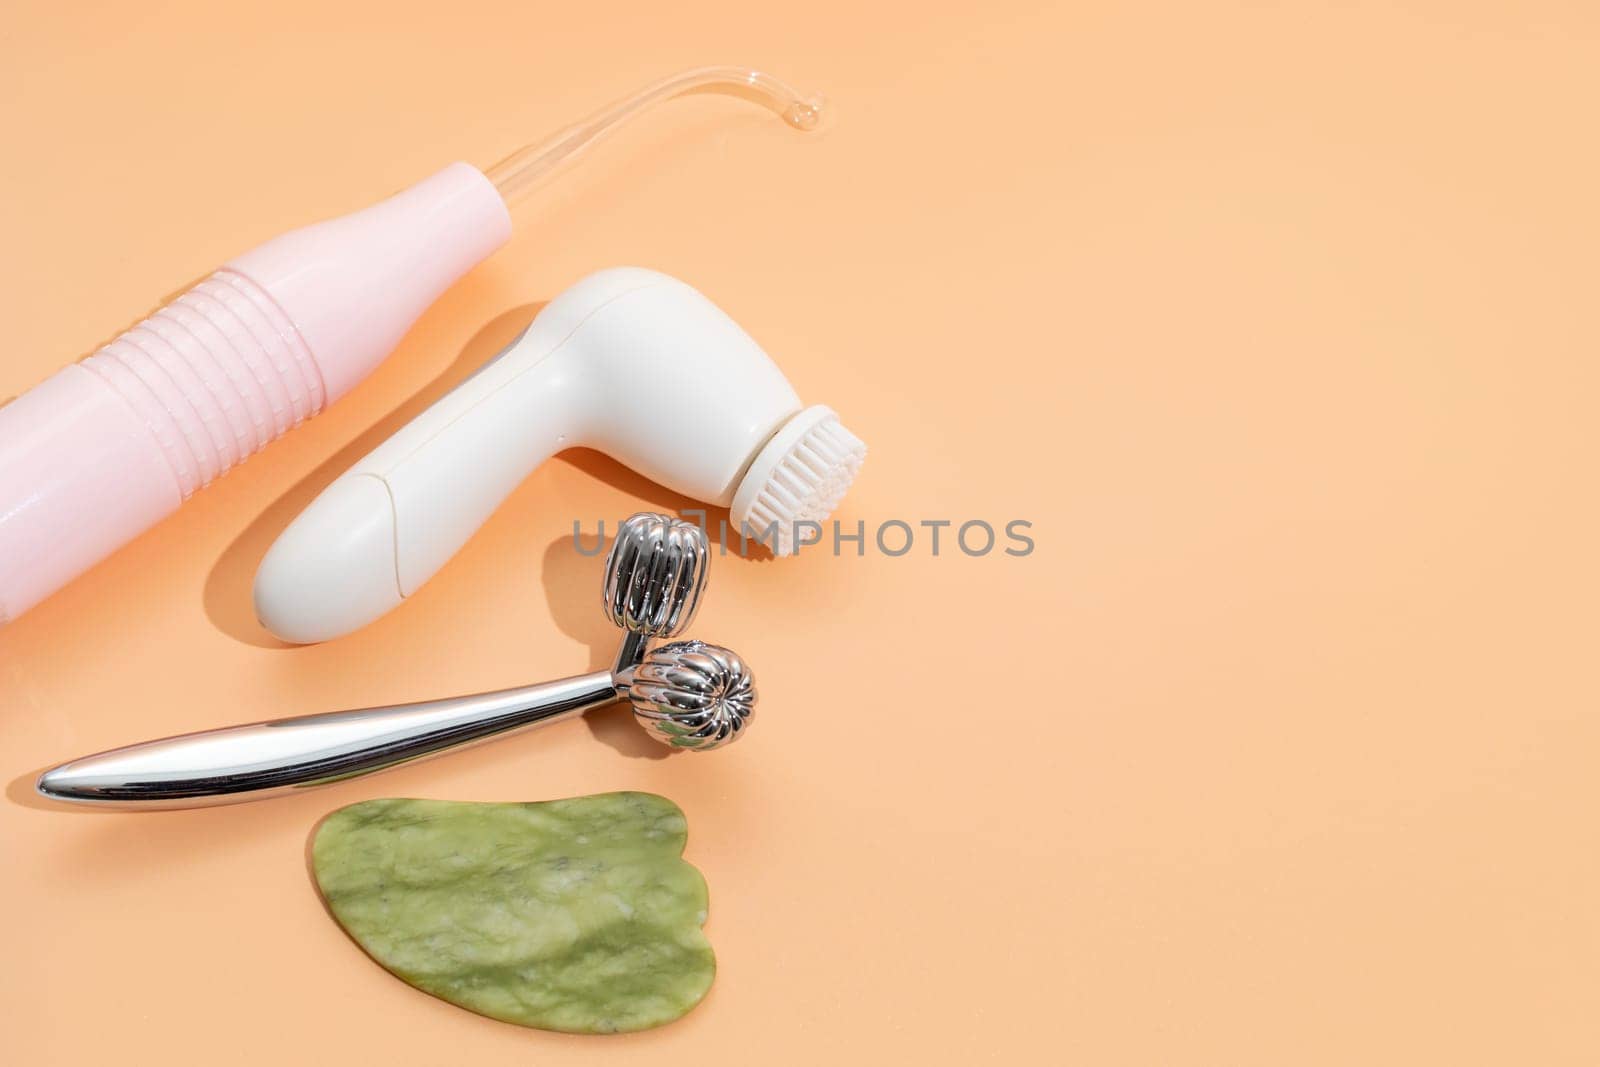 Flatly Mockup Skin Care Products. Facial Tool Gua Sha, Darsonval Skin Beauty Device, Sculpt Facial Roller, Anti-Aging, Facial Cleansing Brush on Beige Background. Copy Space For Text. Horizontal